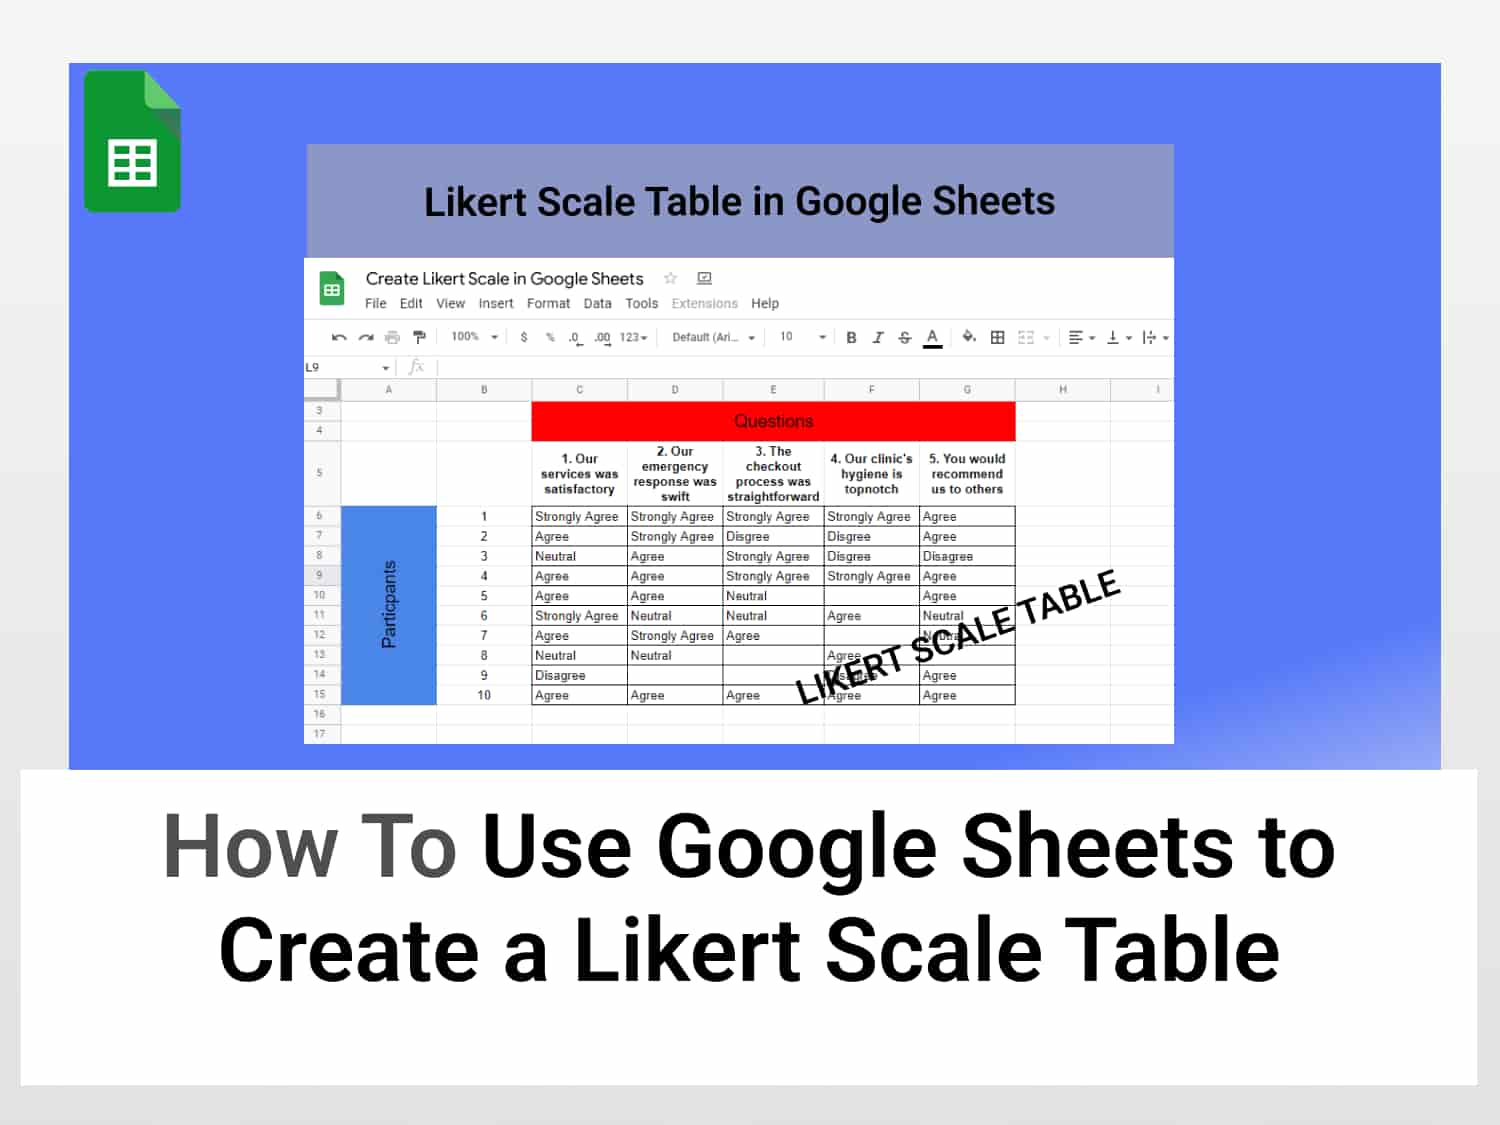 Use Google Sheets to create a Likert scale table